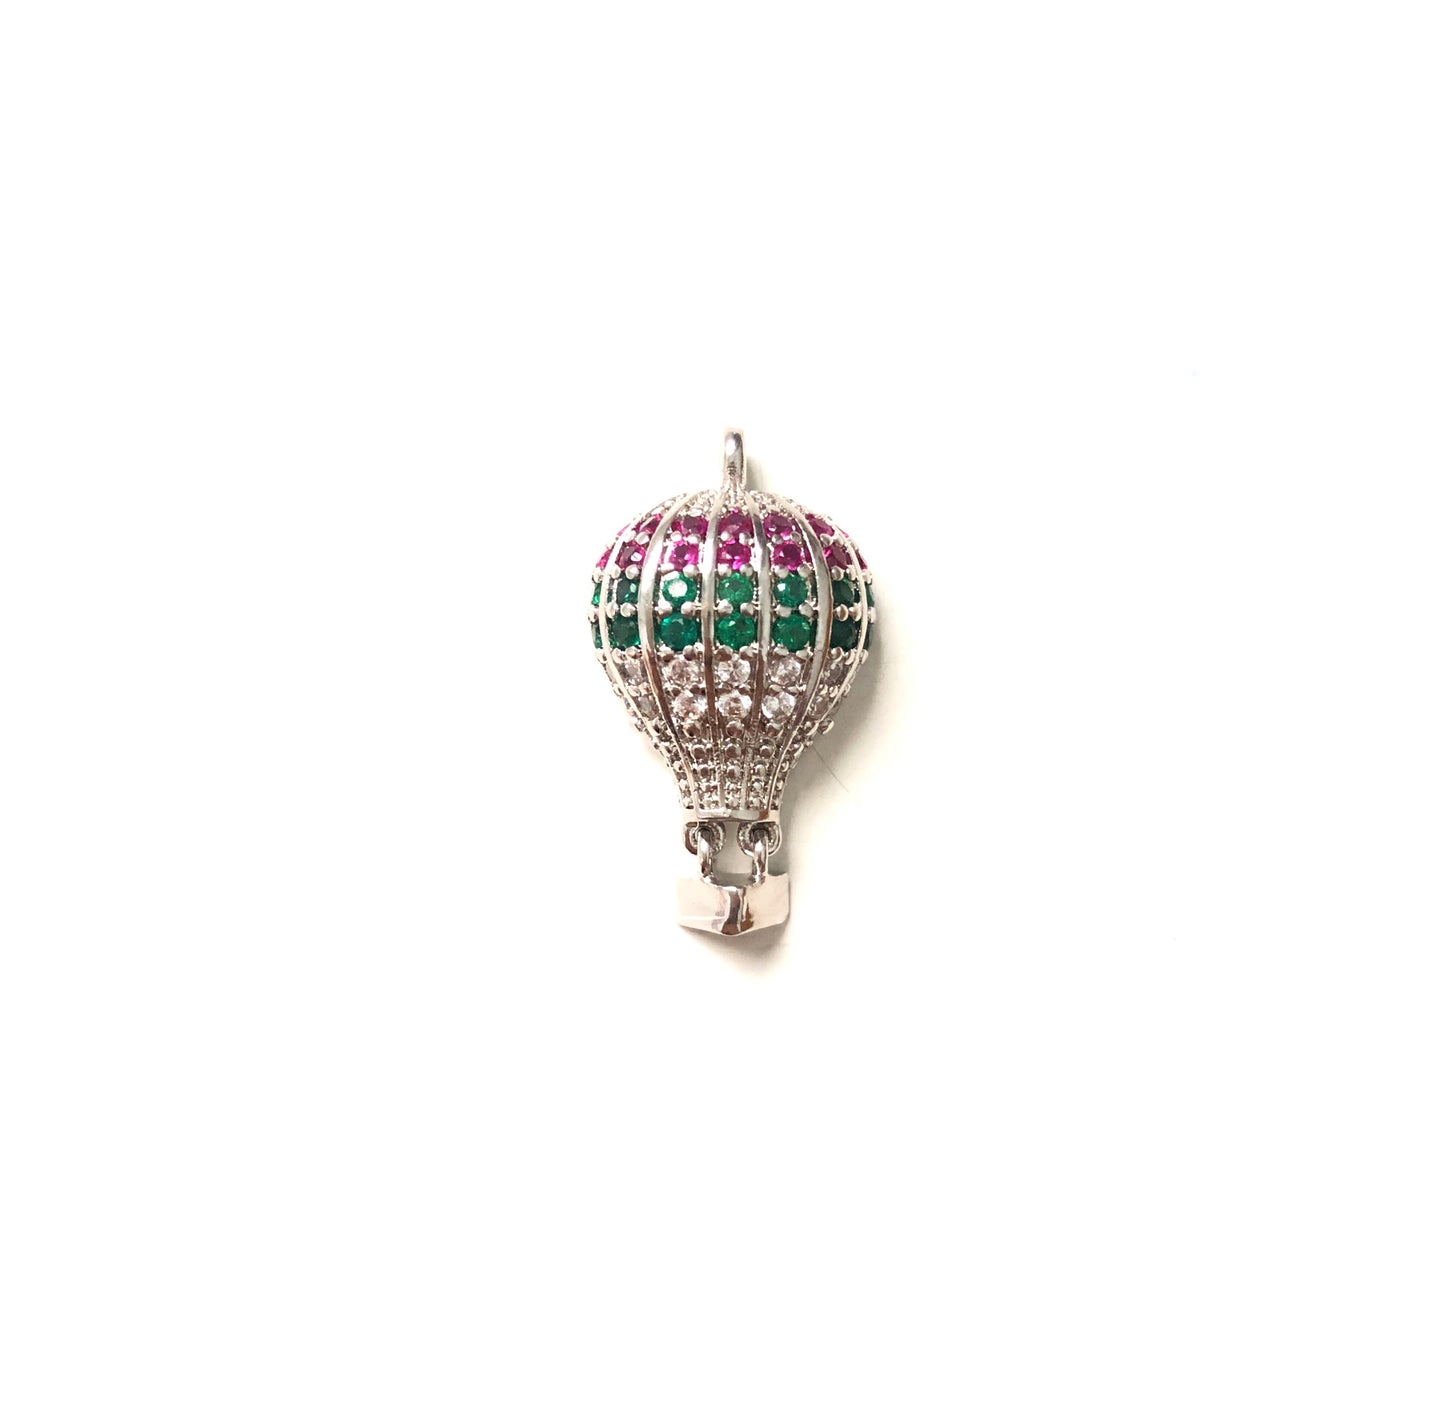 10pcs/lot 23*13mm CZ Paved Hot Air Ballon Charms Green-Silver CZ Paved Charms Colorful Zirconia Charms Beads Beyond